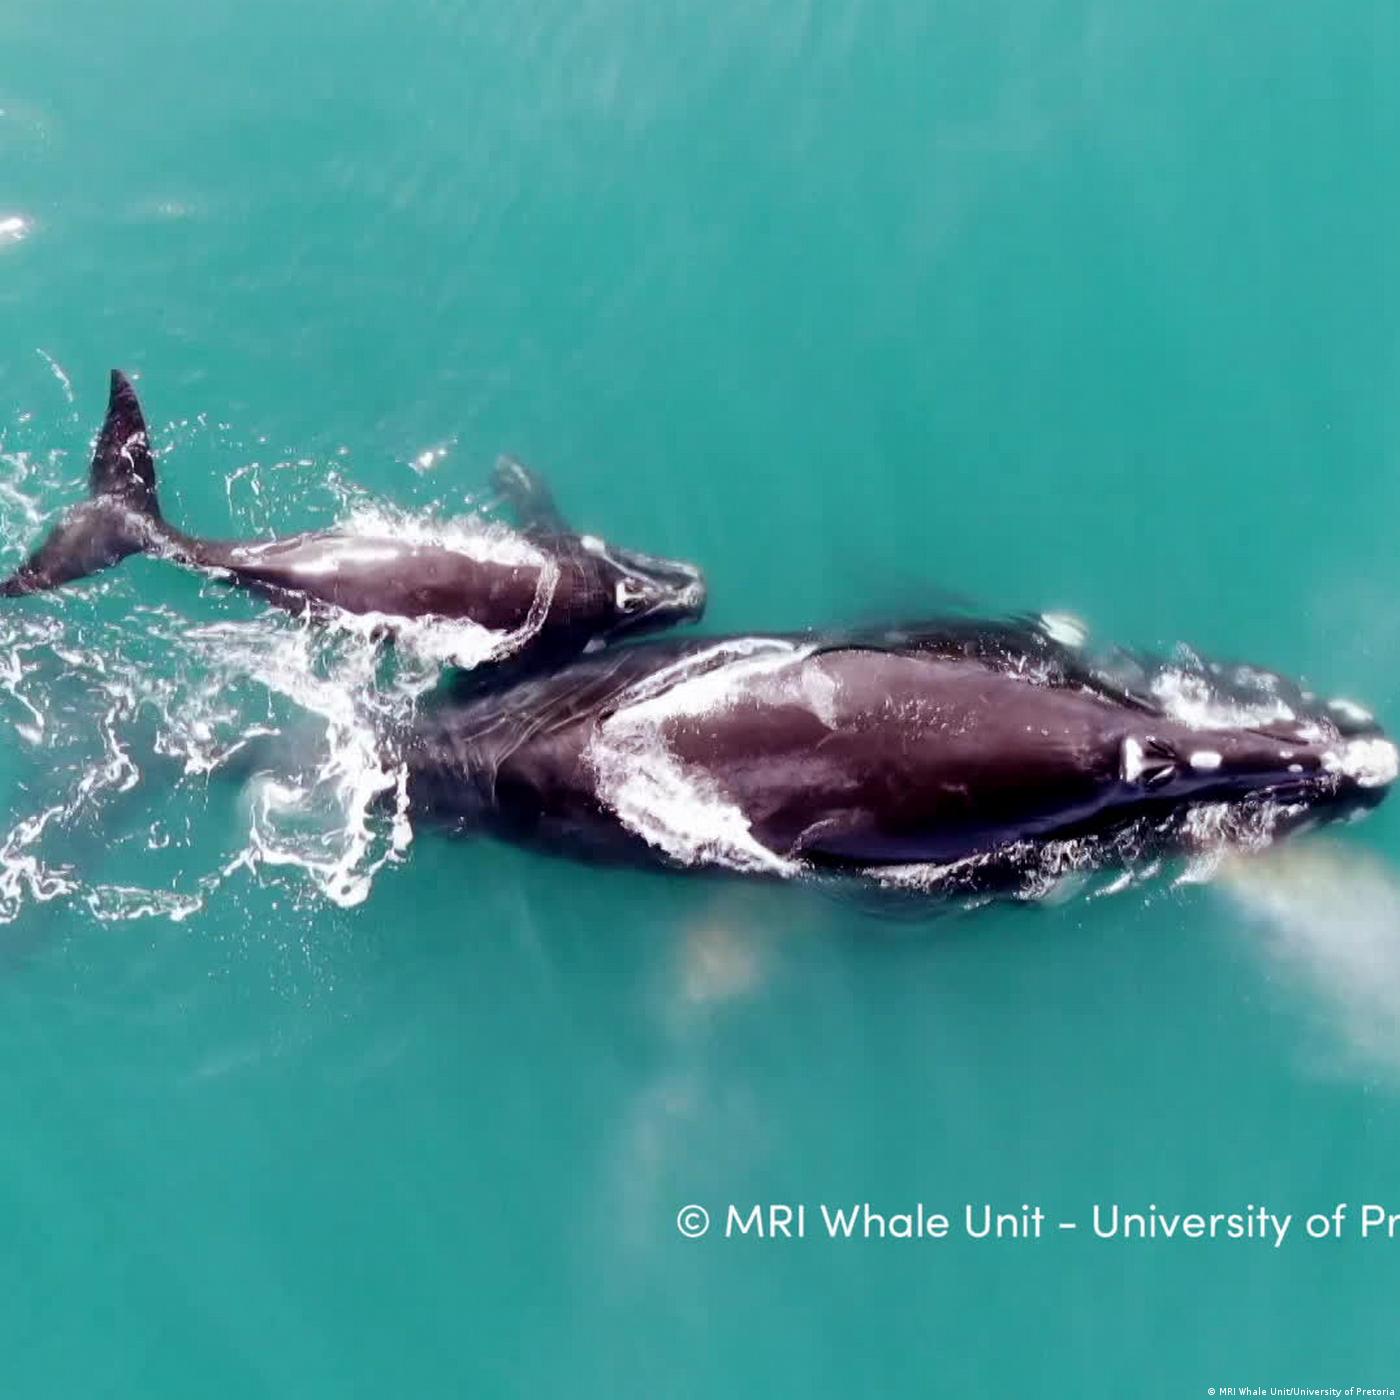 South Africa: Southern right whales face new challenges